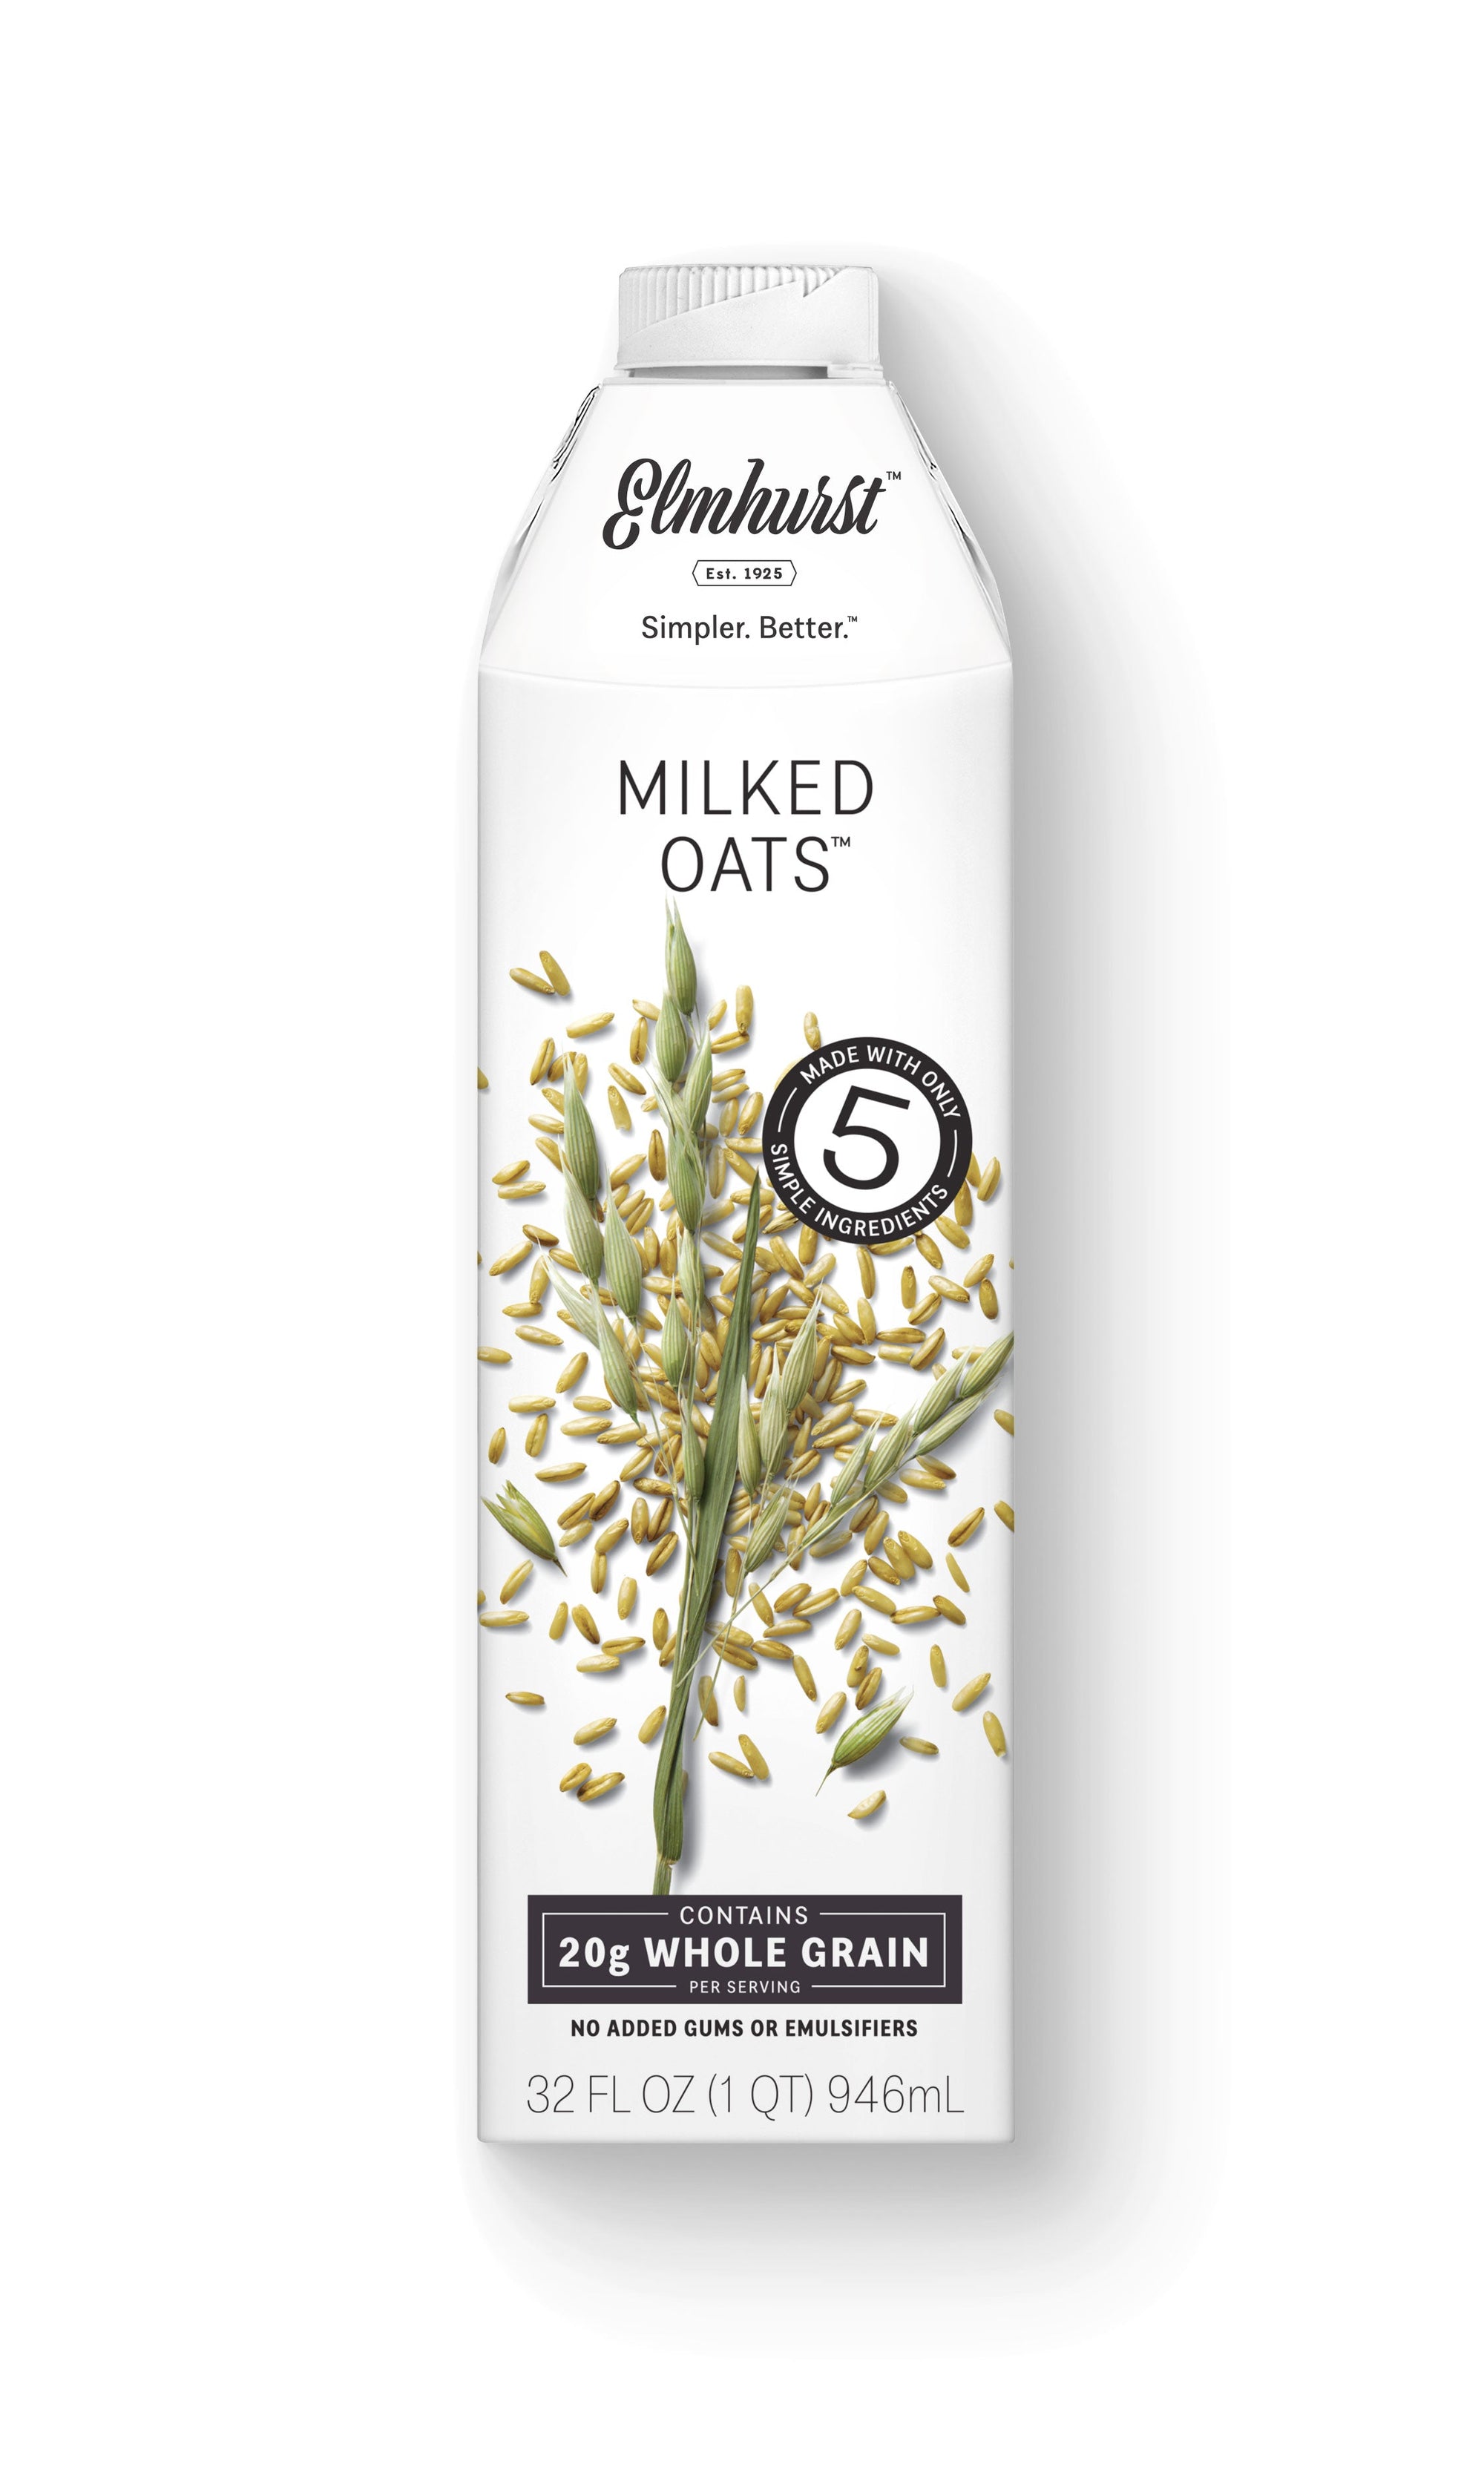 Milked Oats™ exclusive at Tastermonial